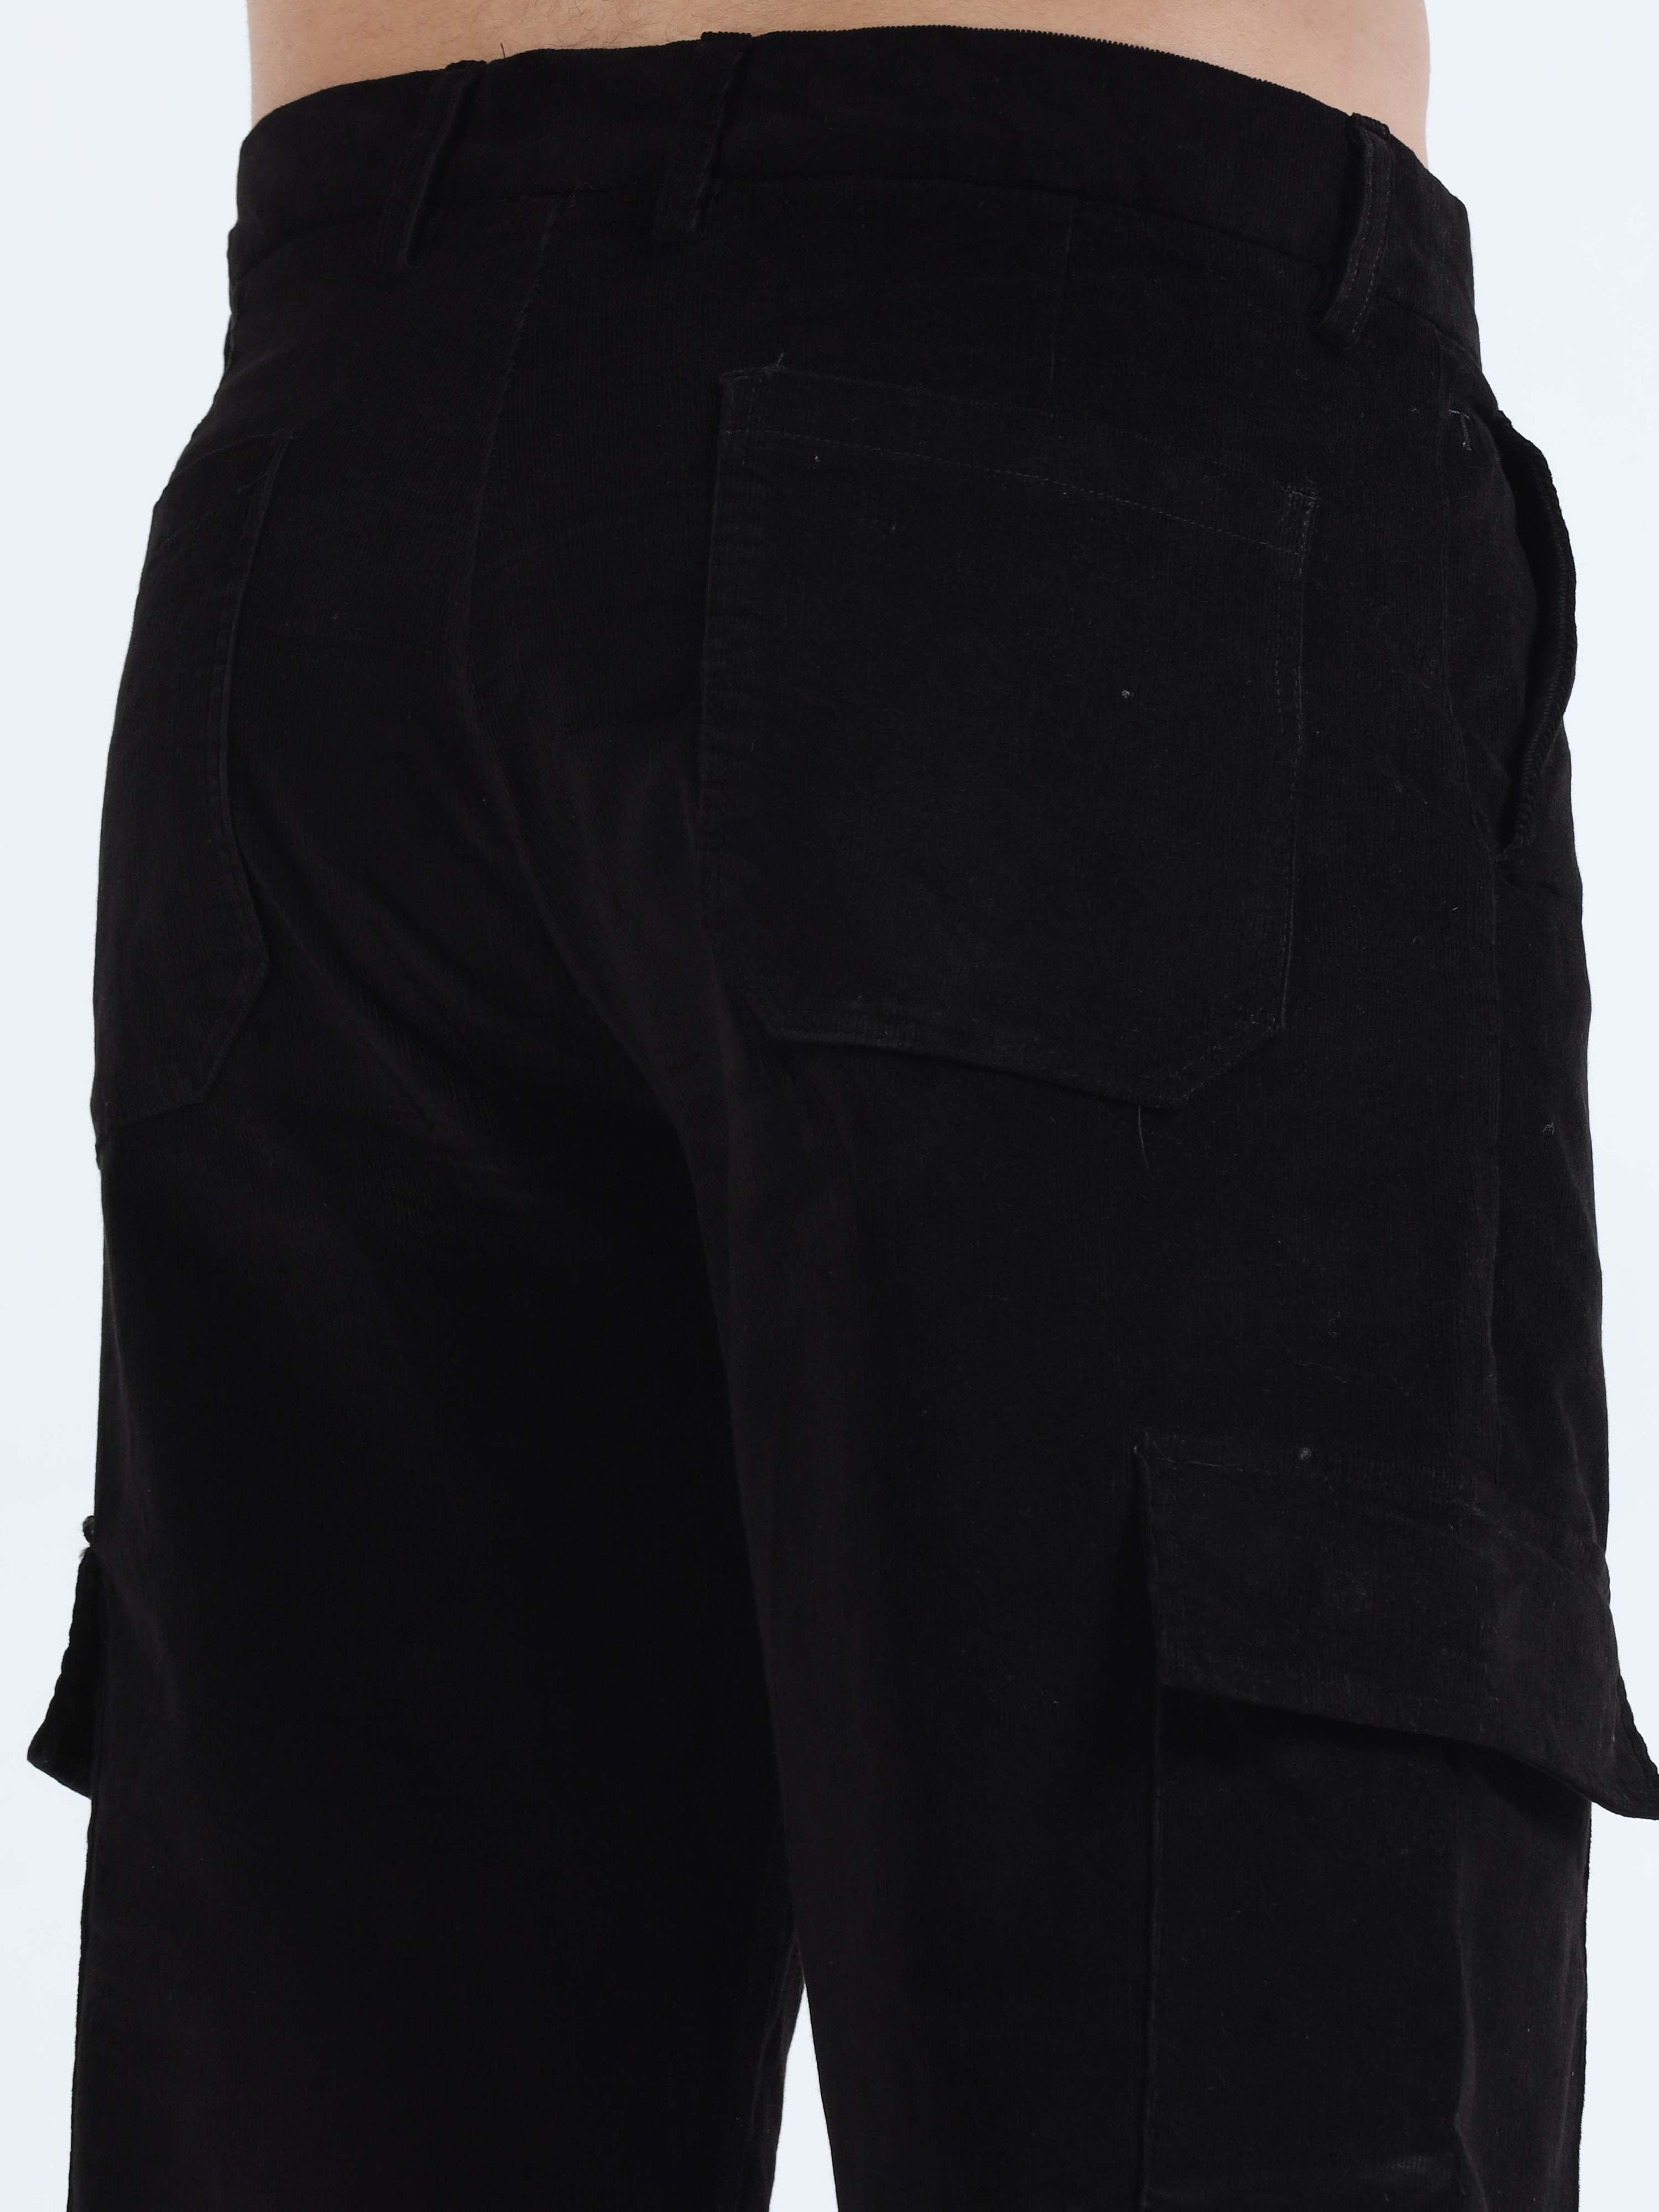 Soft Corduroy Black Relaxed Cargo Pant